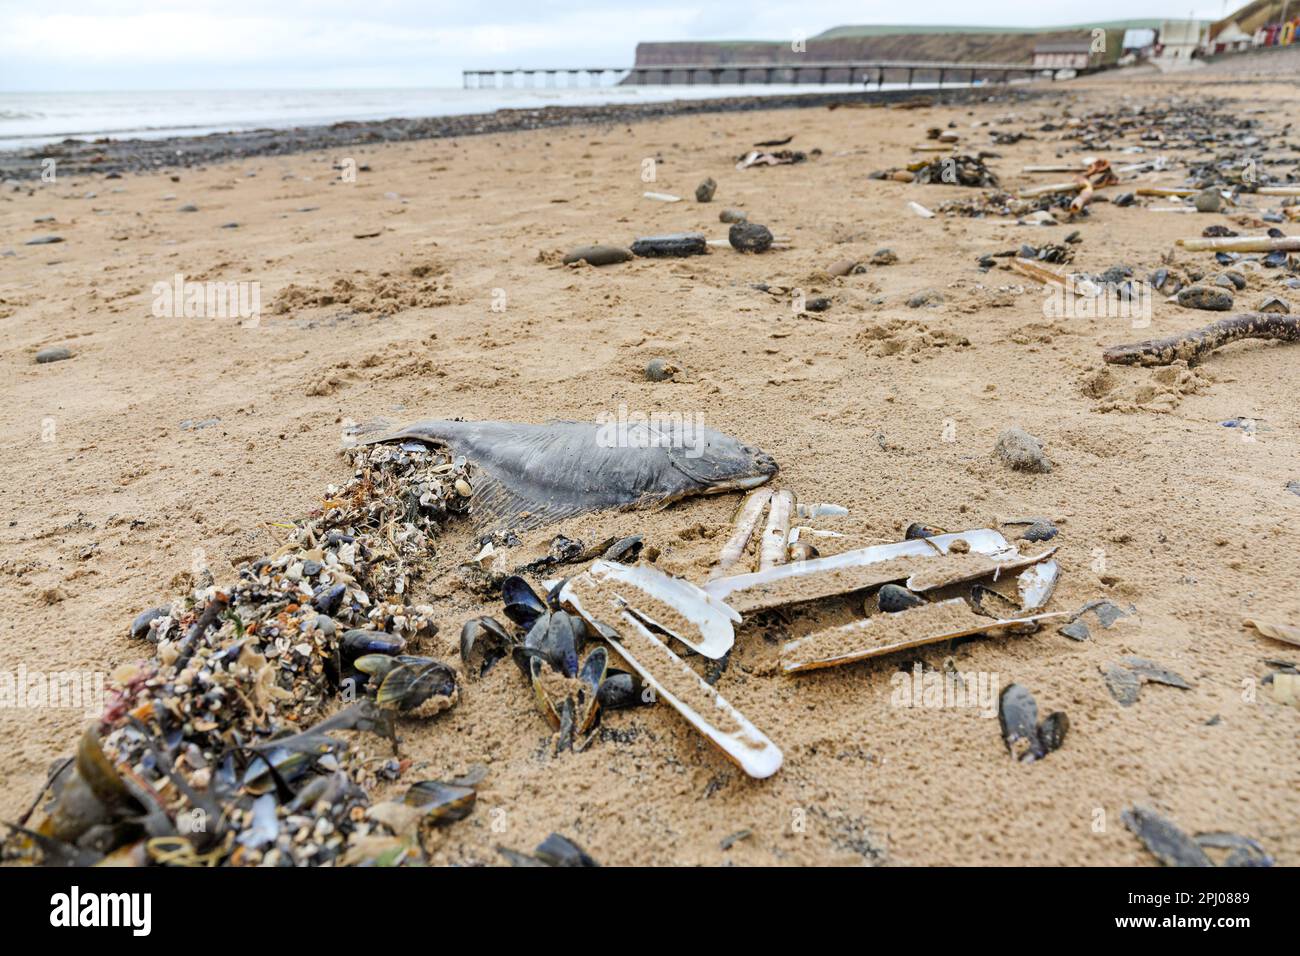 Saltburn-by-the-Sea, North Yorkshire. 30th March 2023. Thousands of dead mussels, razor clams, star fish and other sea creatures, along with large amounts of coal have washed up on Saltburn beach over the last few days. The Environment Agency’s explanation is that the weather has caused this event, however some locals question how the deaths of so many sea creatures has occurred, especially in light of the mass die off that occurred along the north east coastline in 2021 which some people have linked to pollution. Credit: David Forster/Alamy Live News Stock Photo